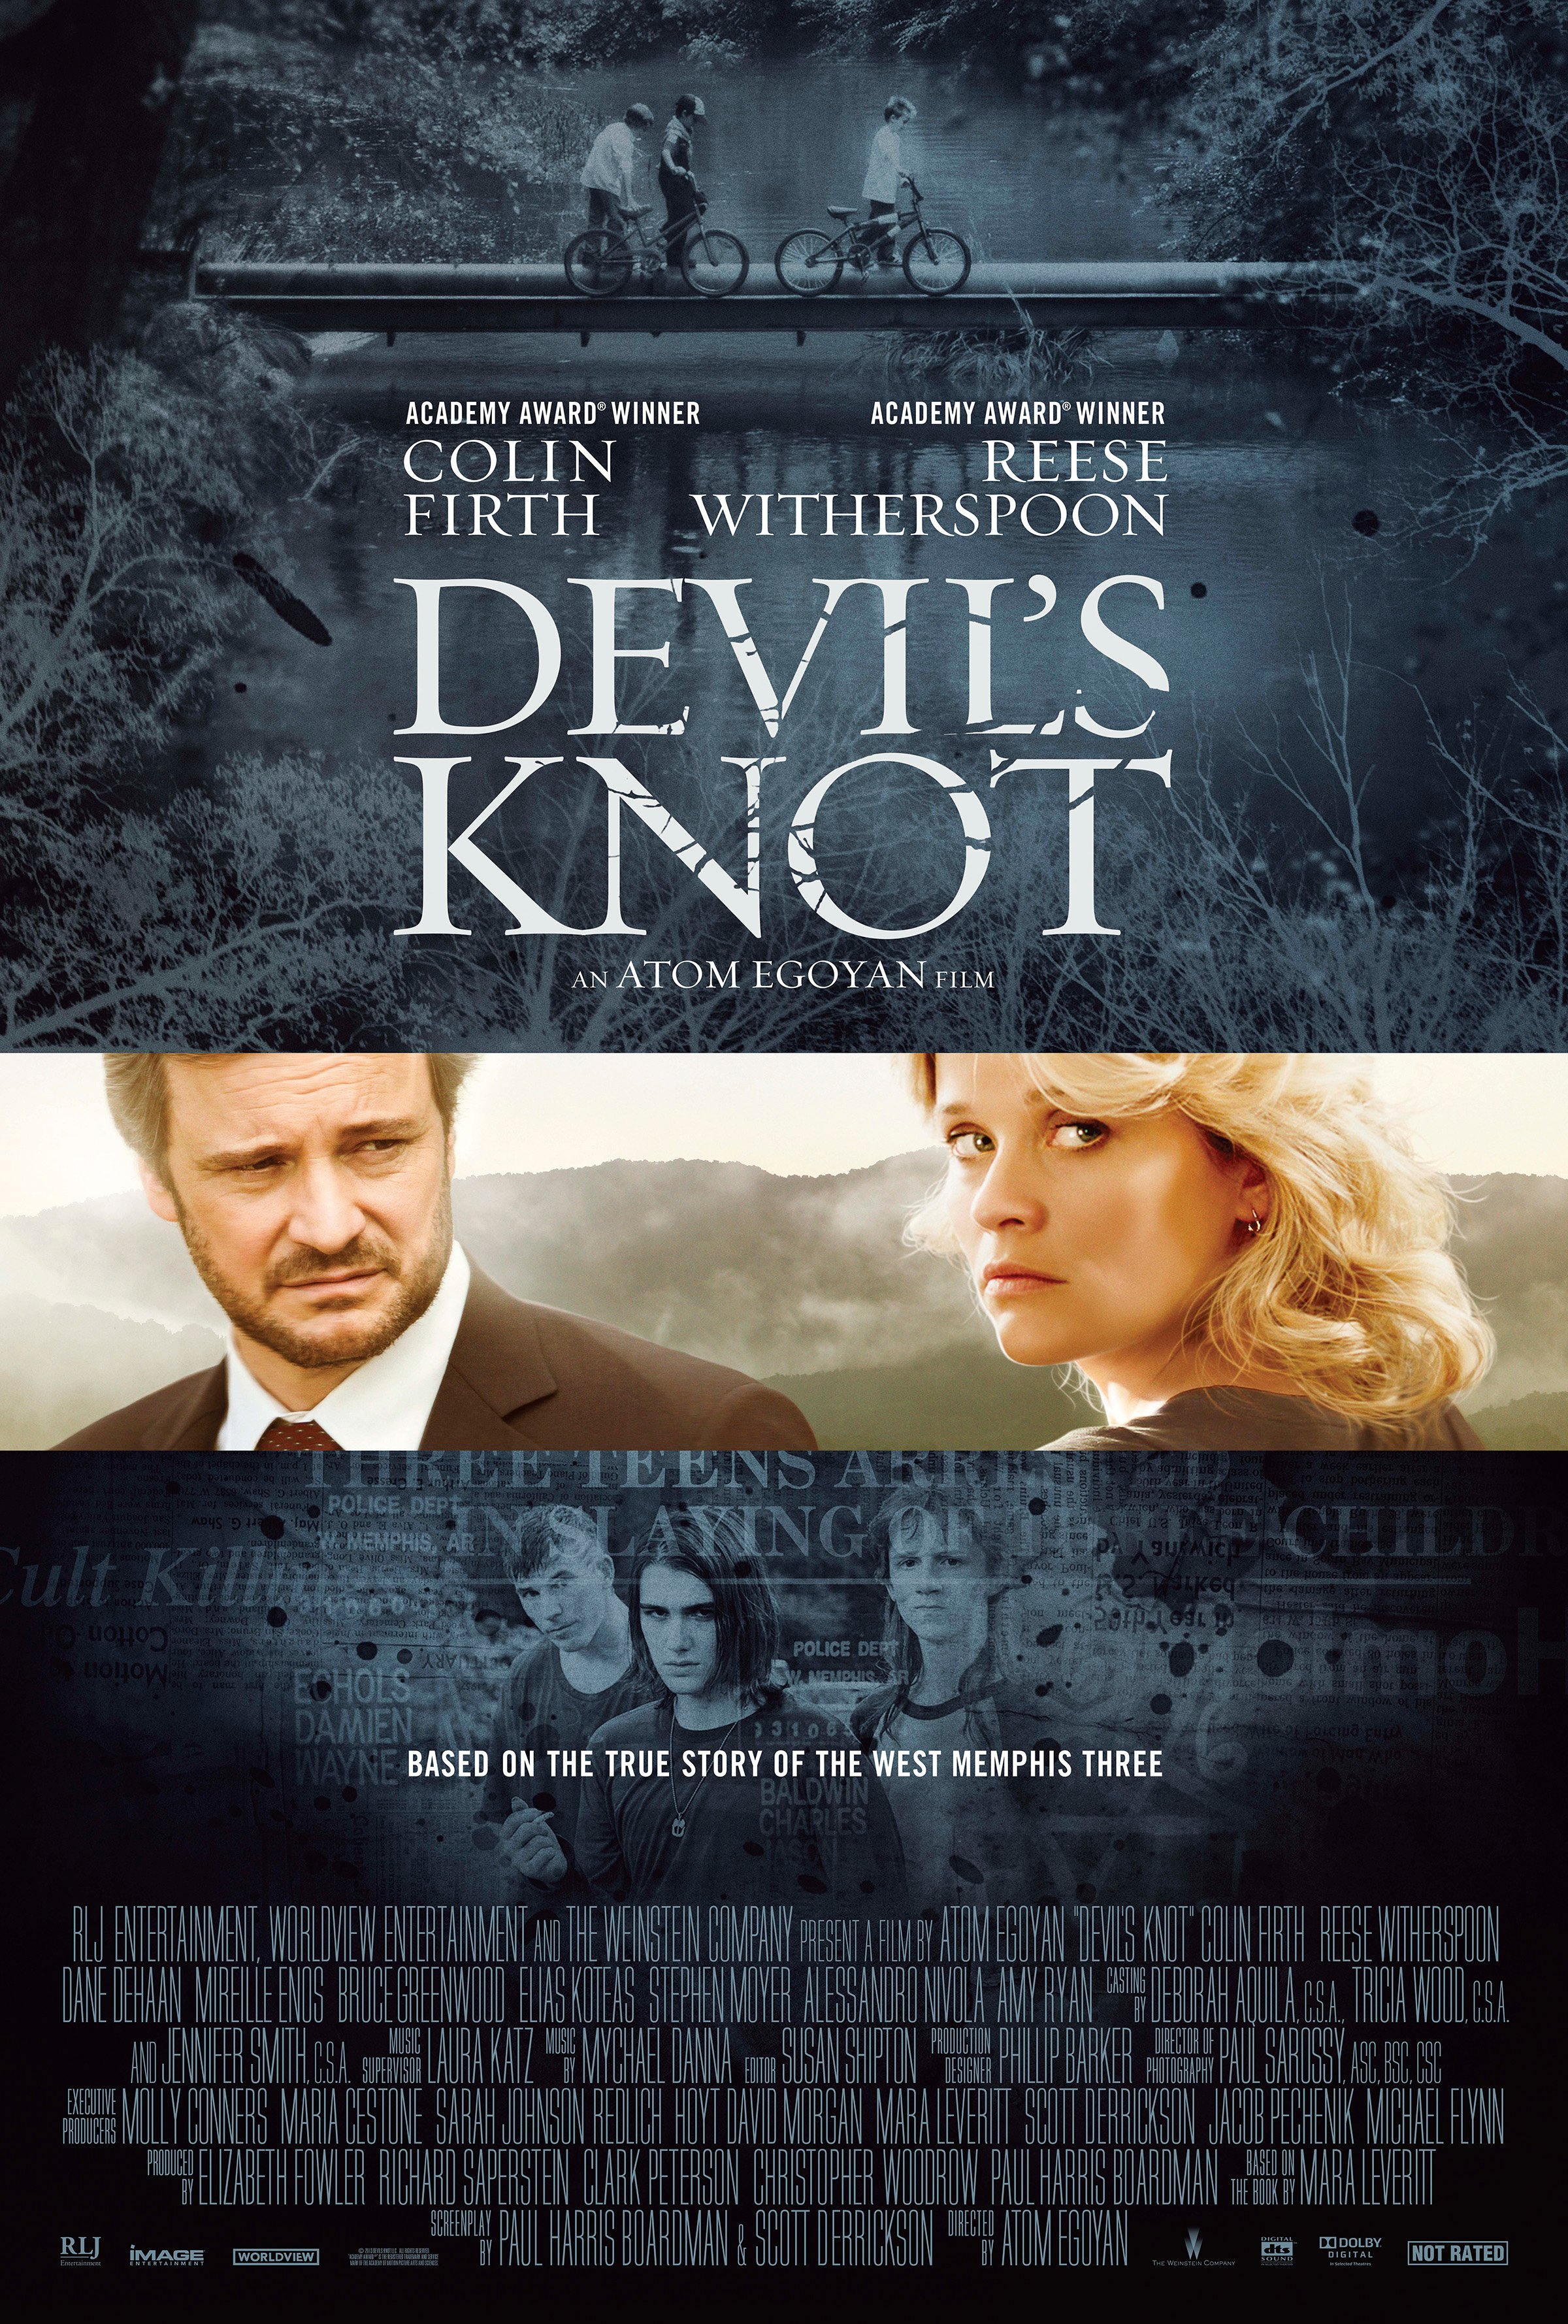 Devil's Knot Poster Featuring Reese Witherspoon